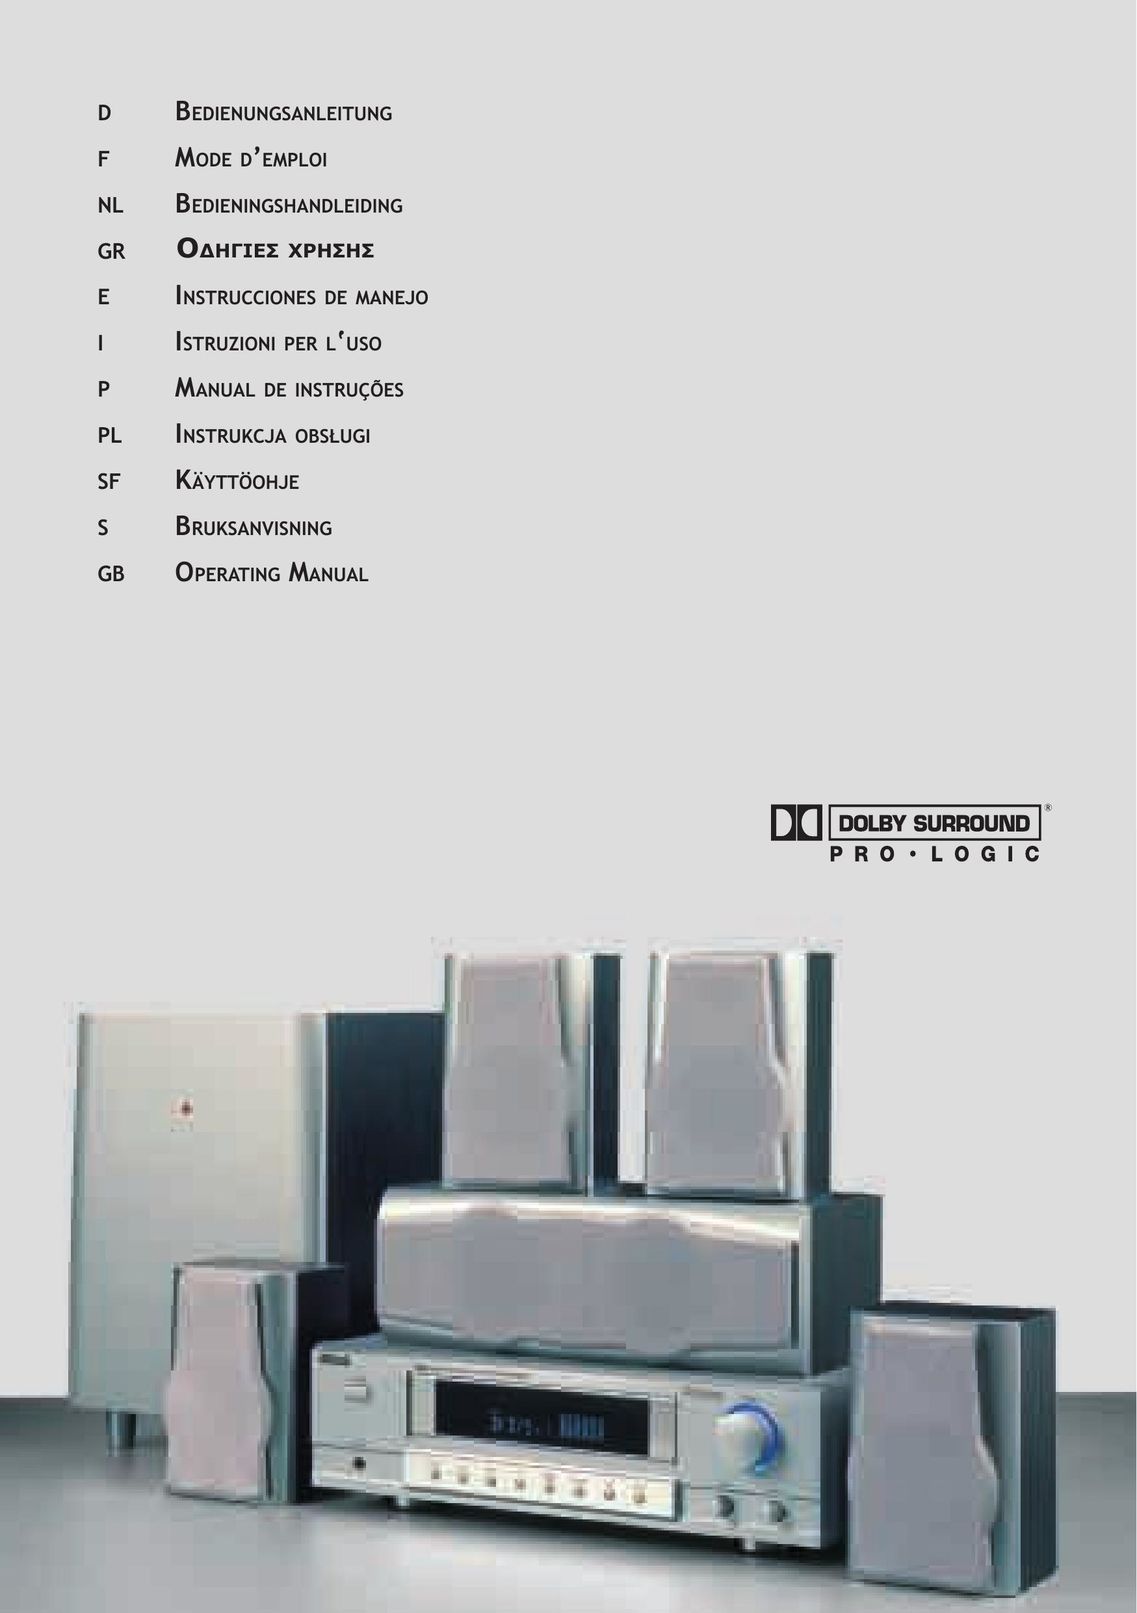 Dolby Laboratories KH 02 Home Theater System User Manual